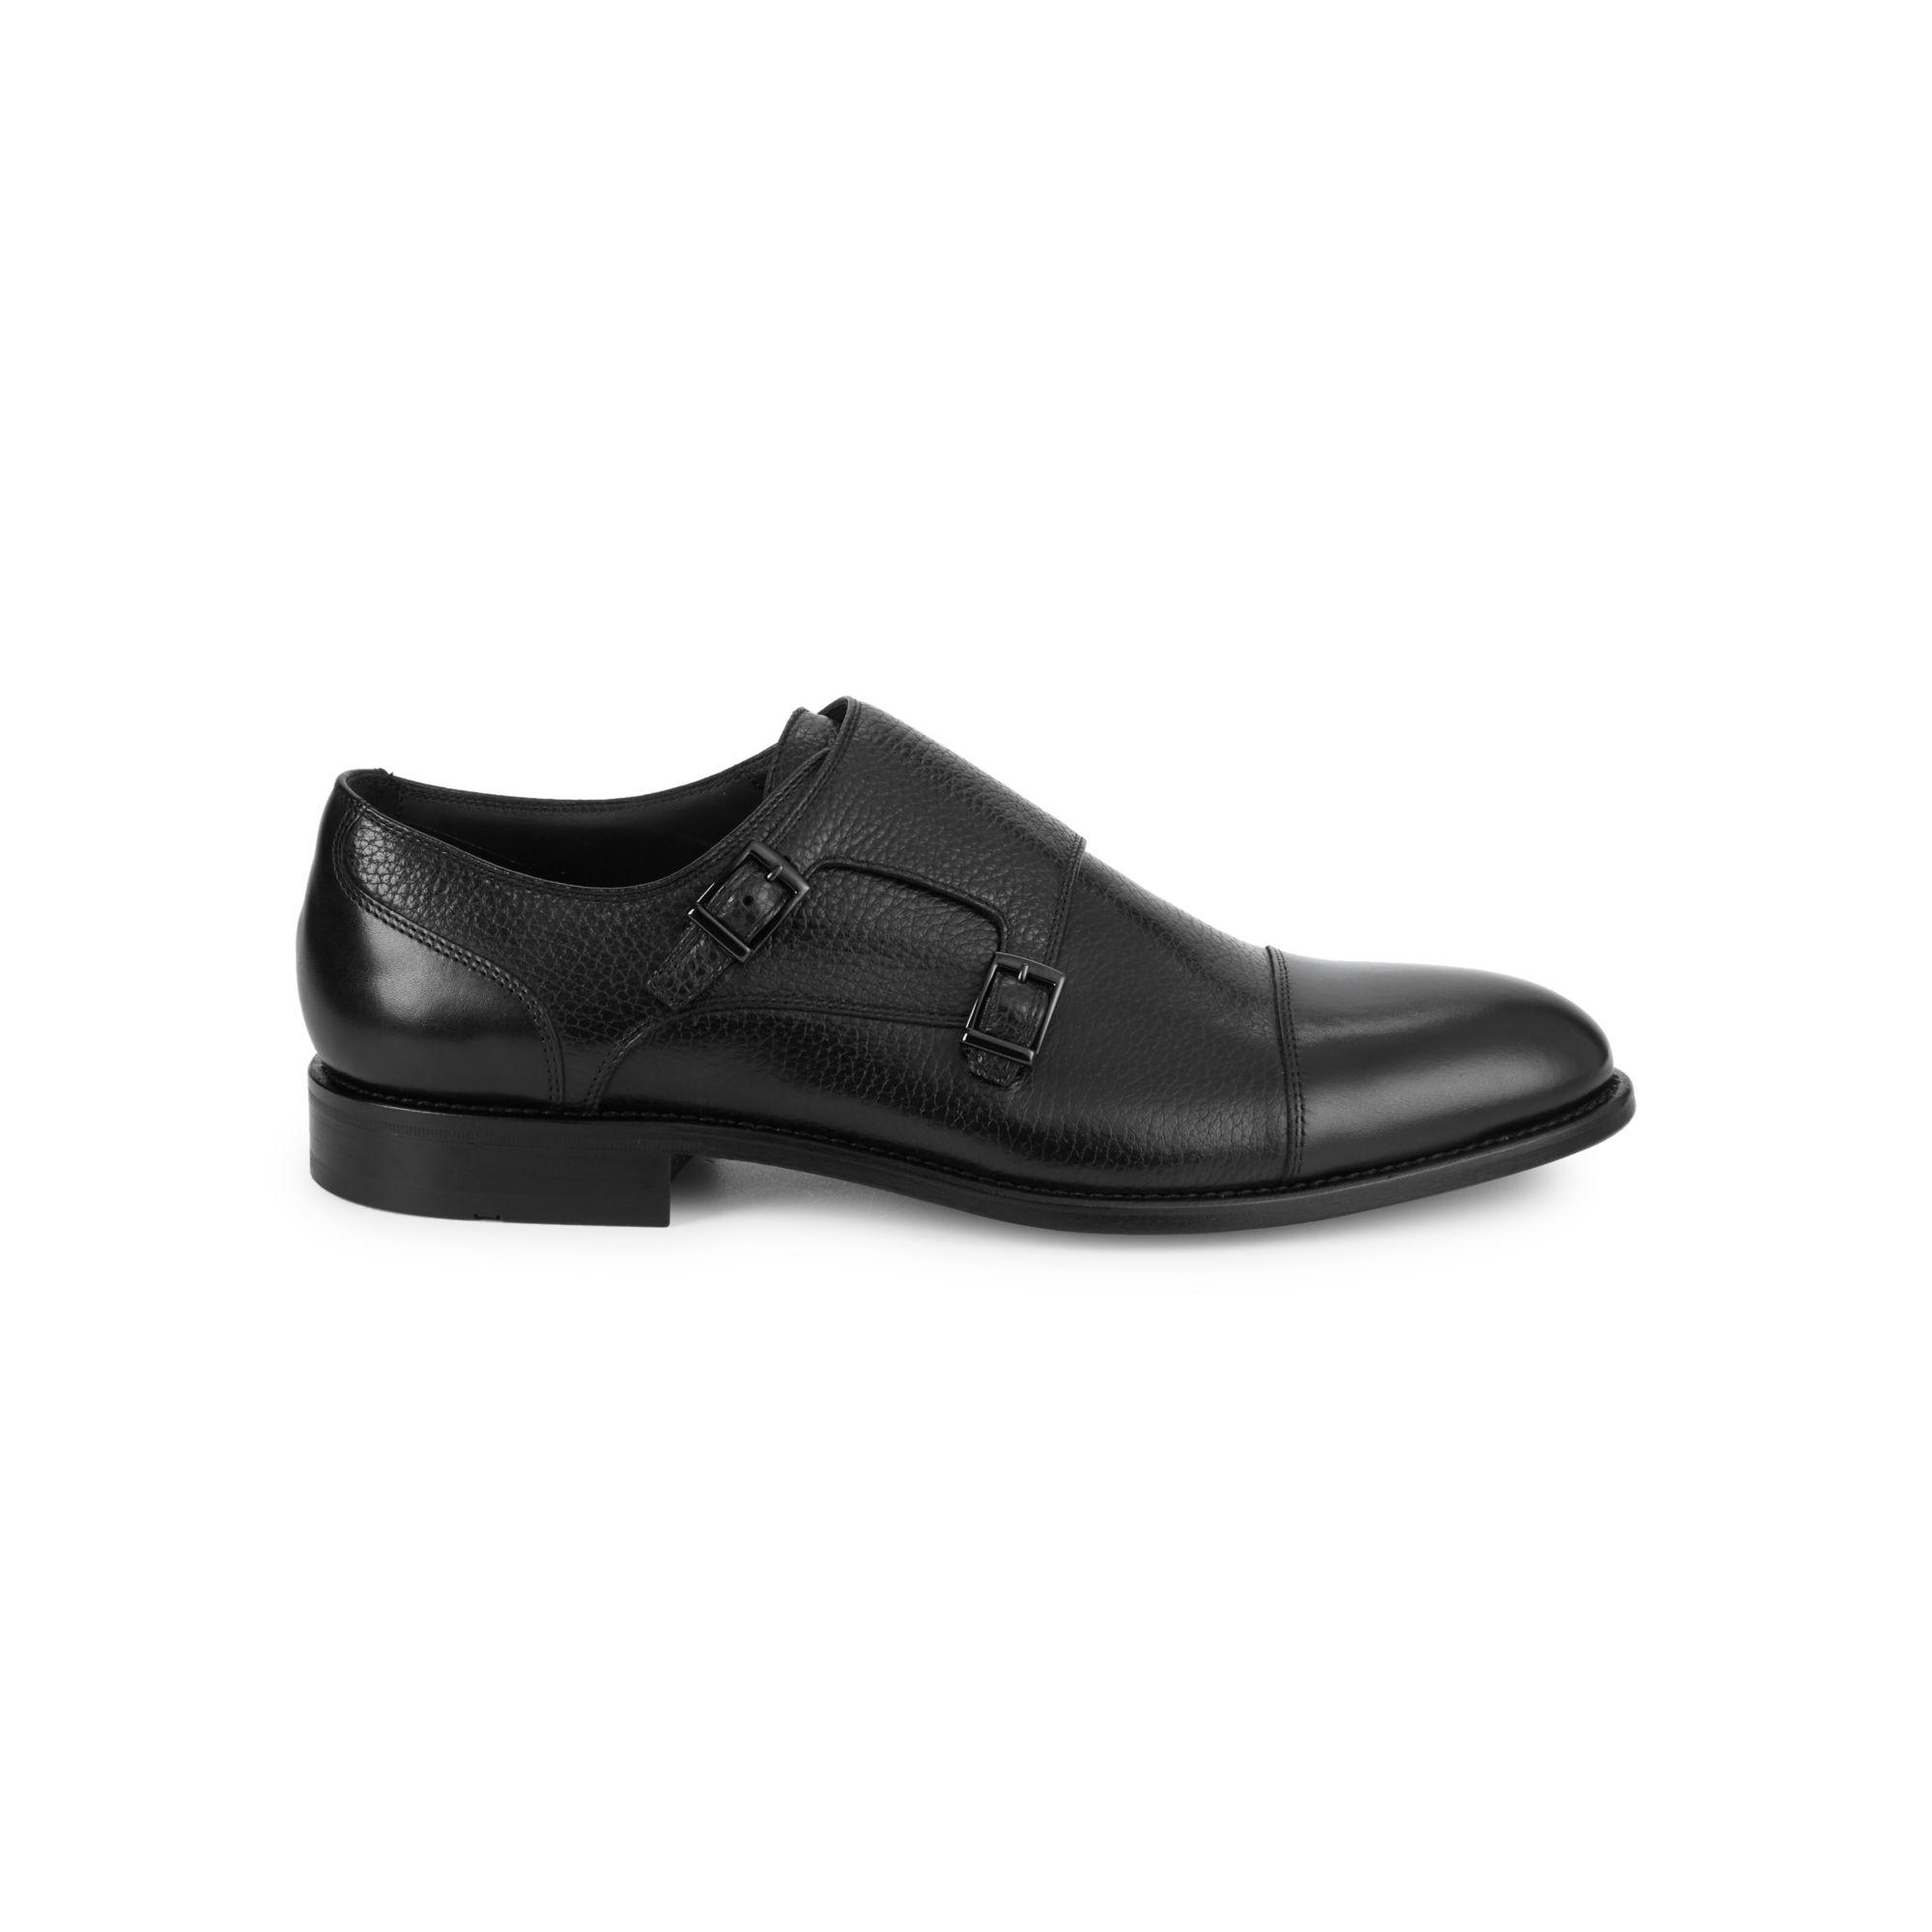 BOSS by Hugo Boss Stockholm Leather Double Monk-strap Shoes in Black ...